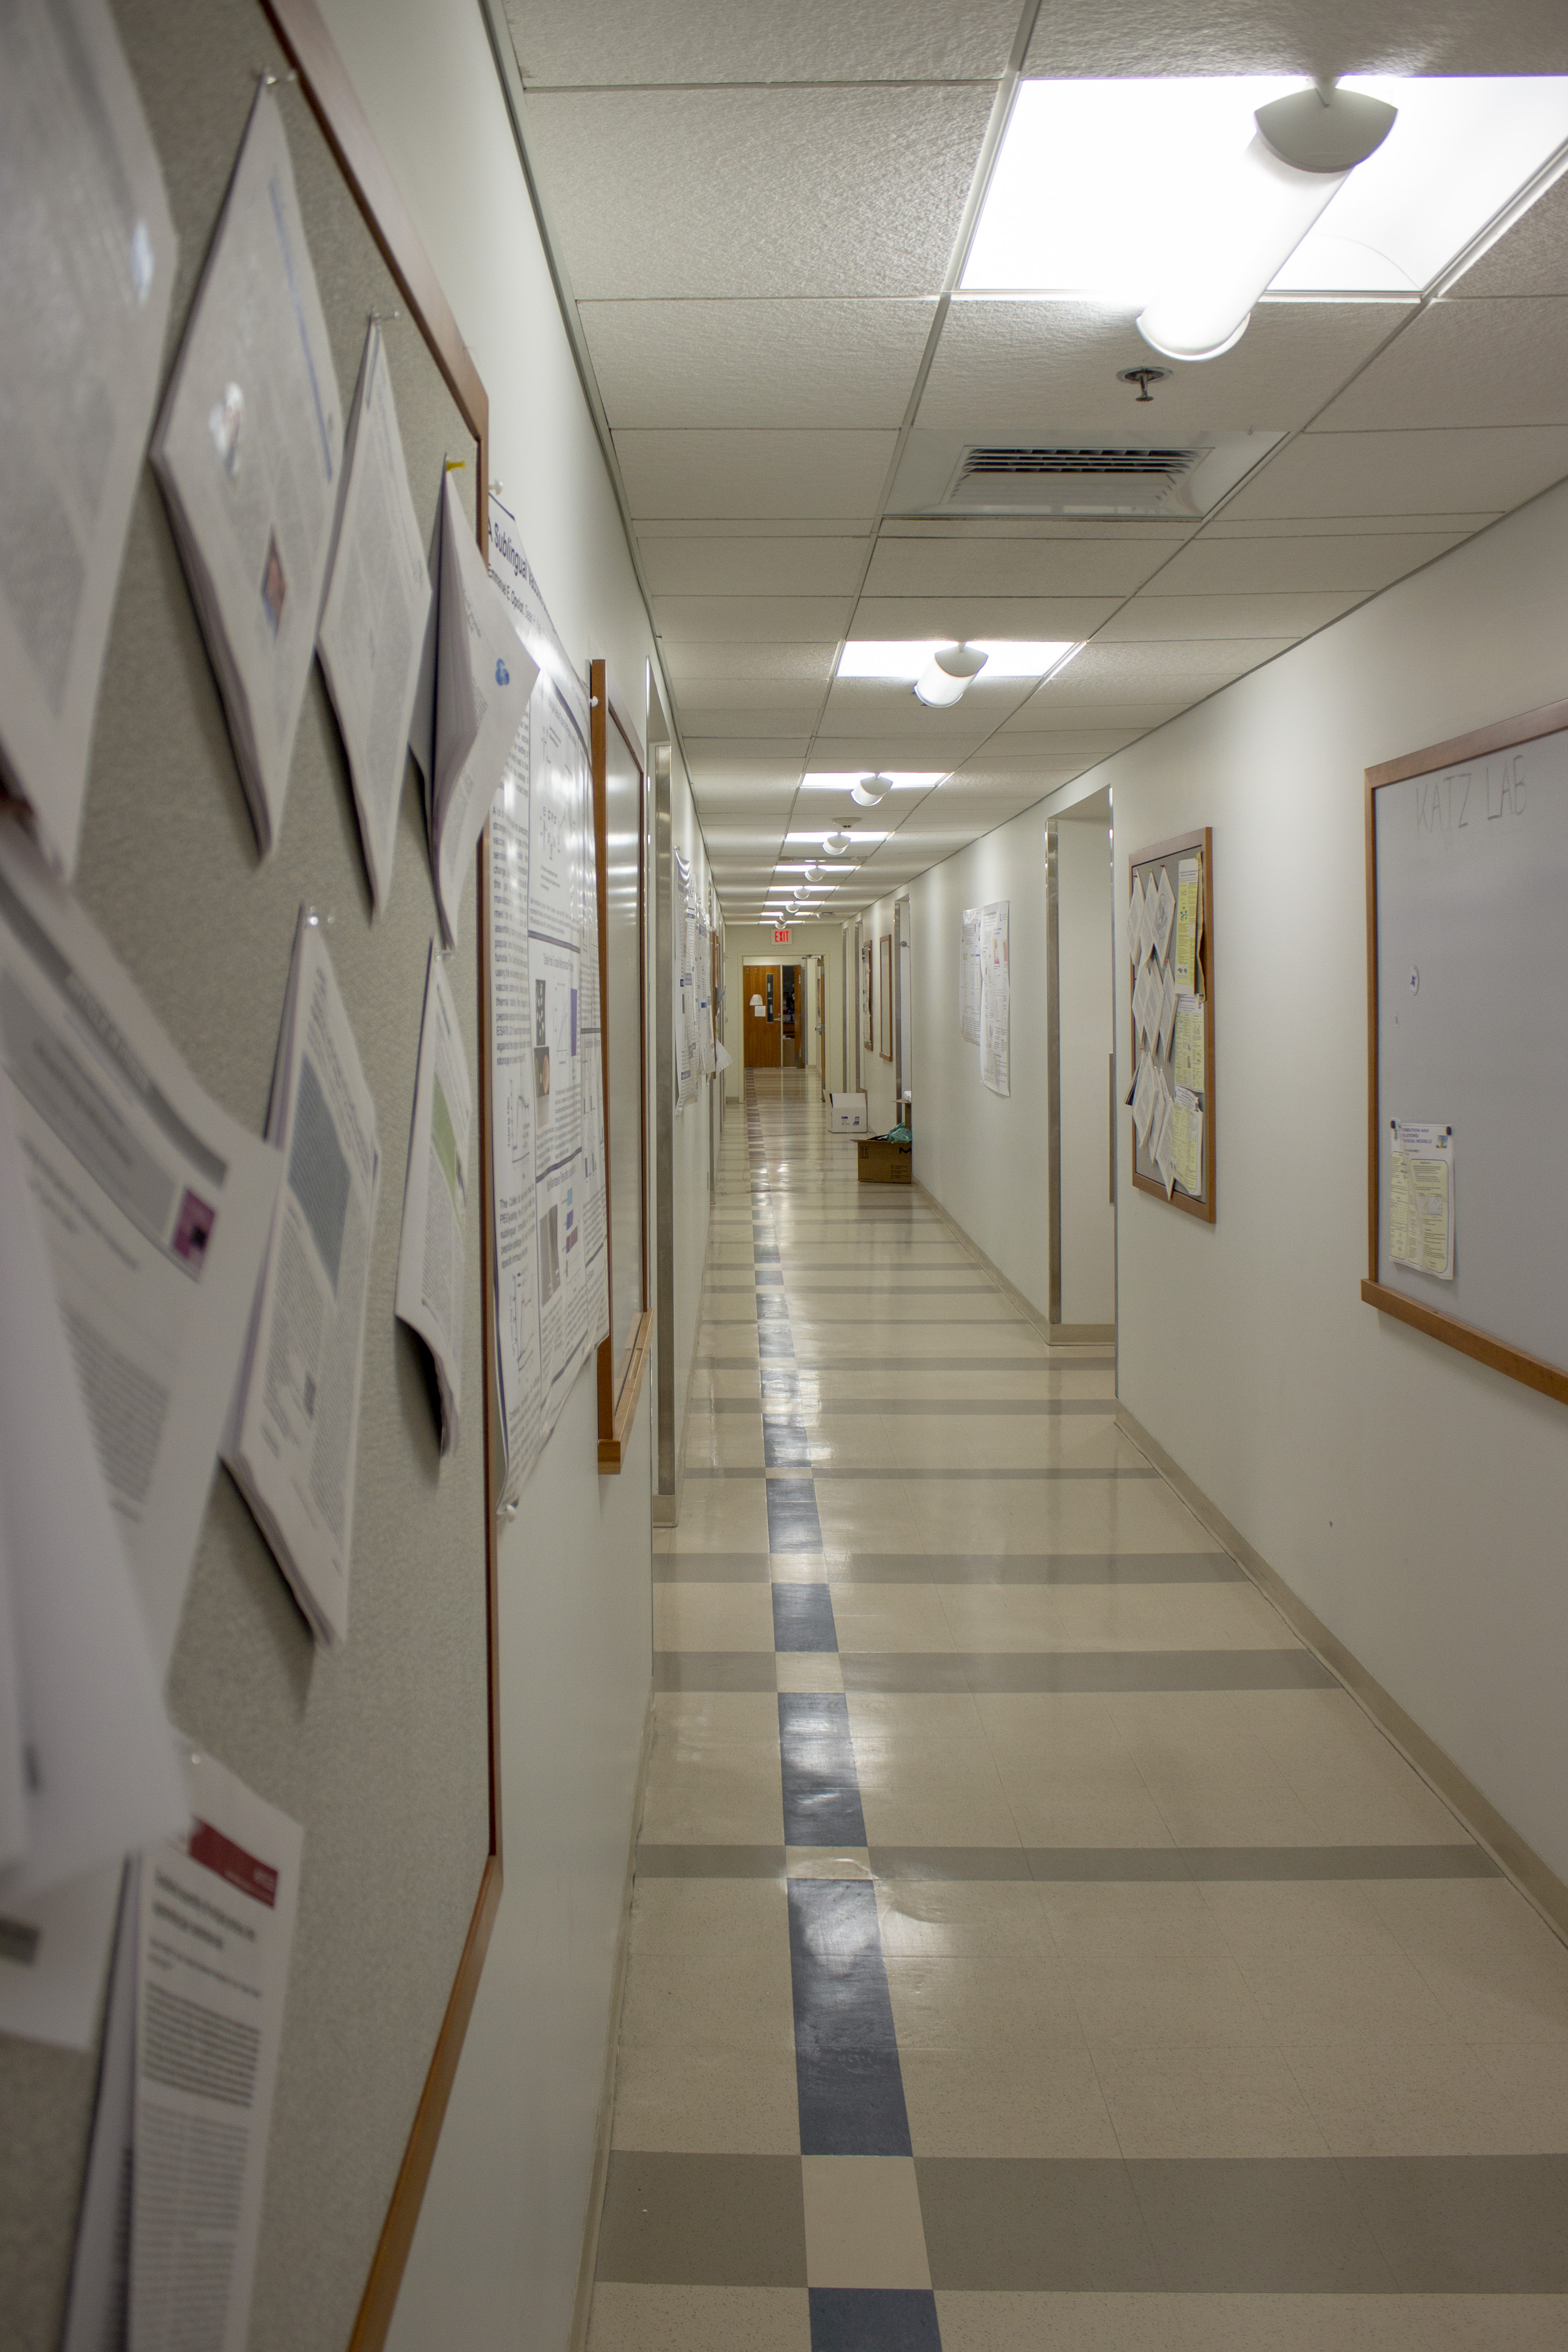 An empty corridor in the Fizpatrick CIEMAS laboratory building shortly after labs reopened from the COVID shutdown